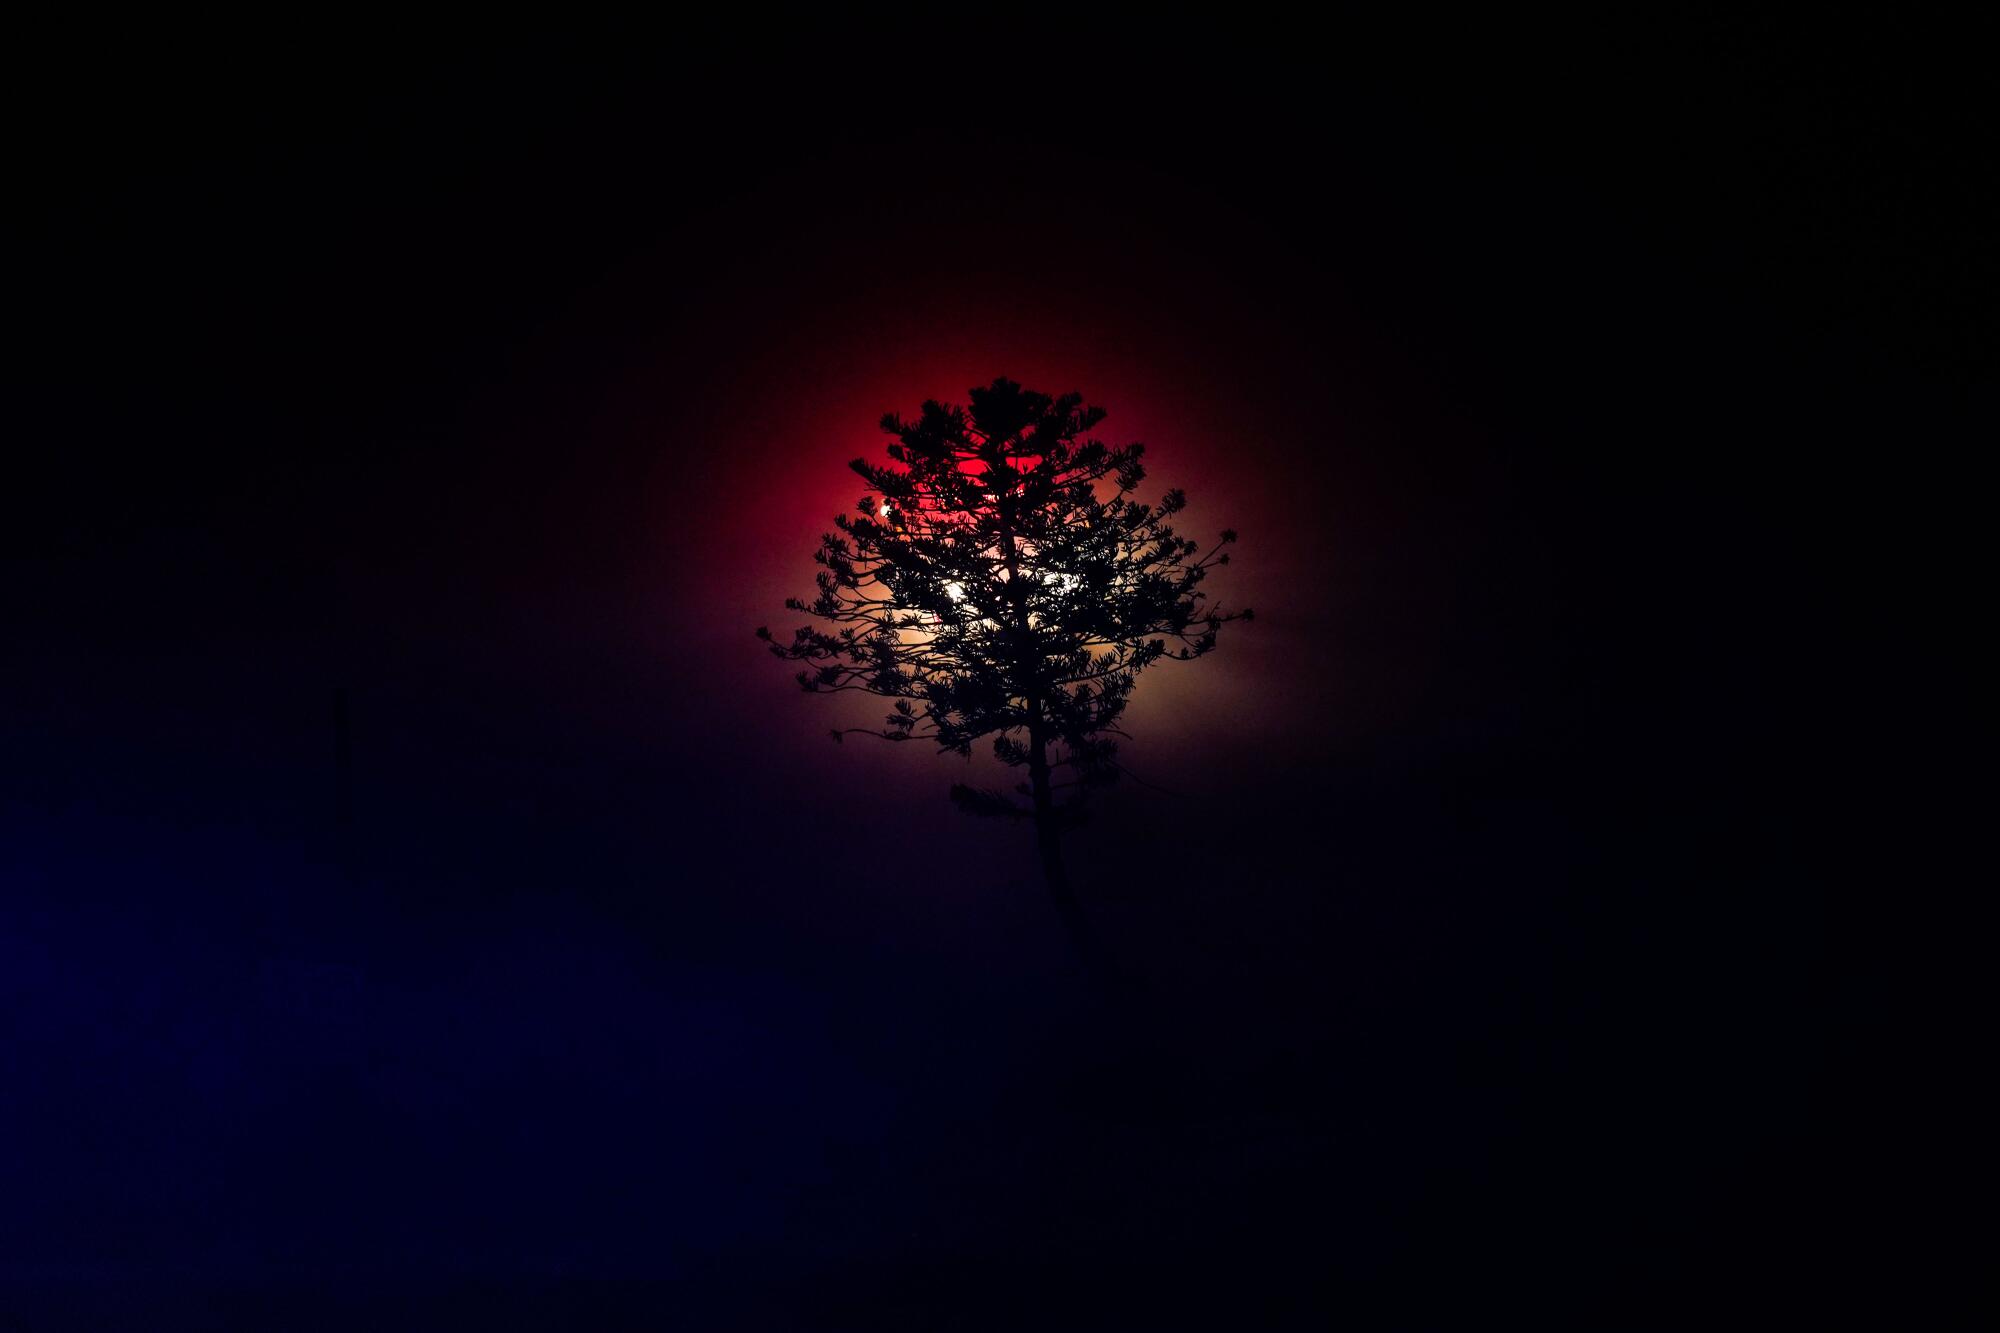 A tree is silhouetted by red and white lights at night